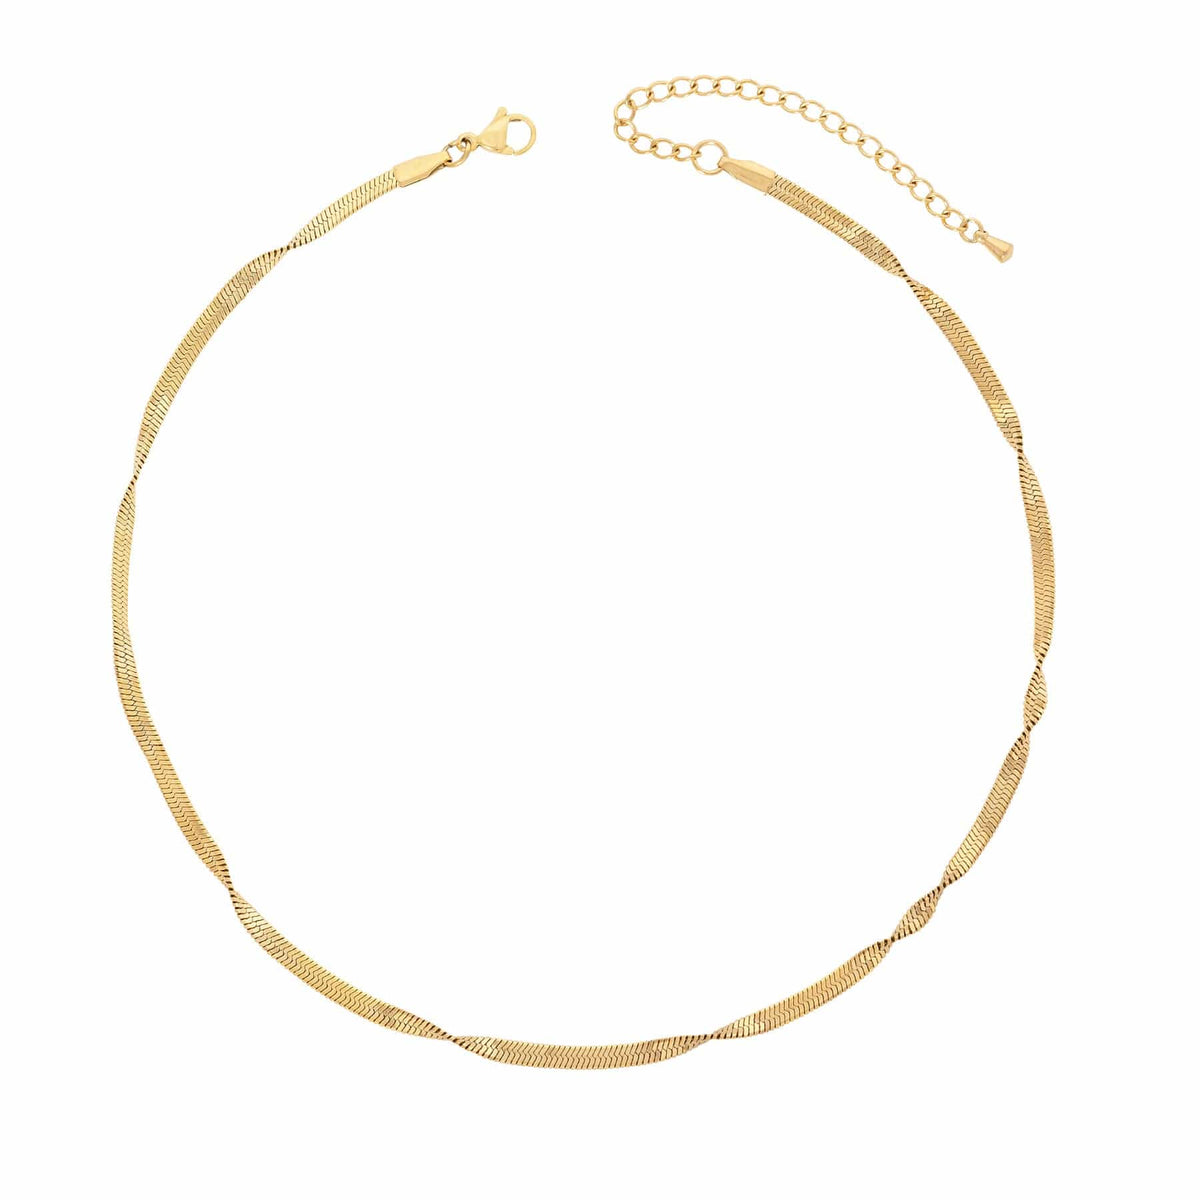 BohoMoon Stainless Steel Twist Necklace Gold